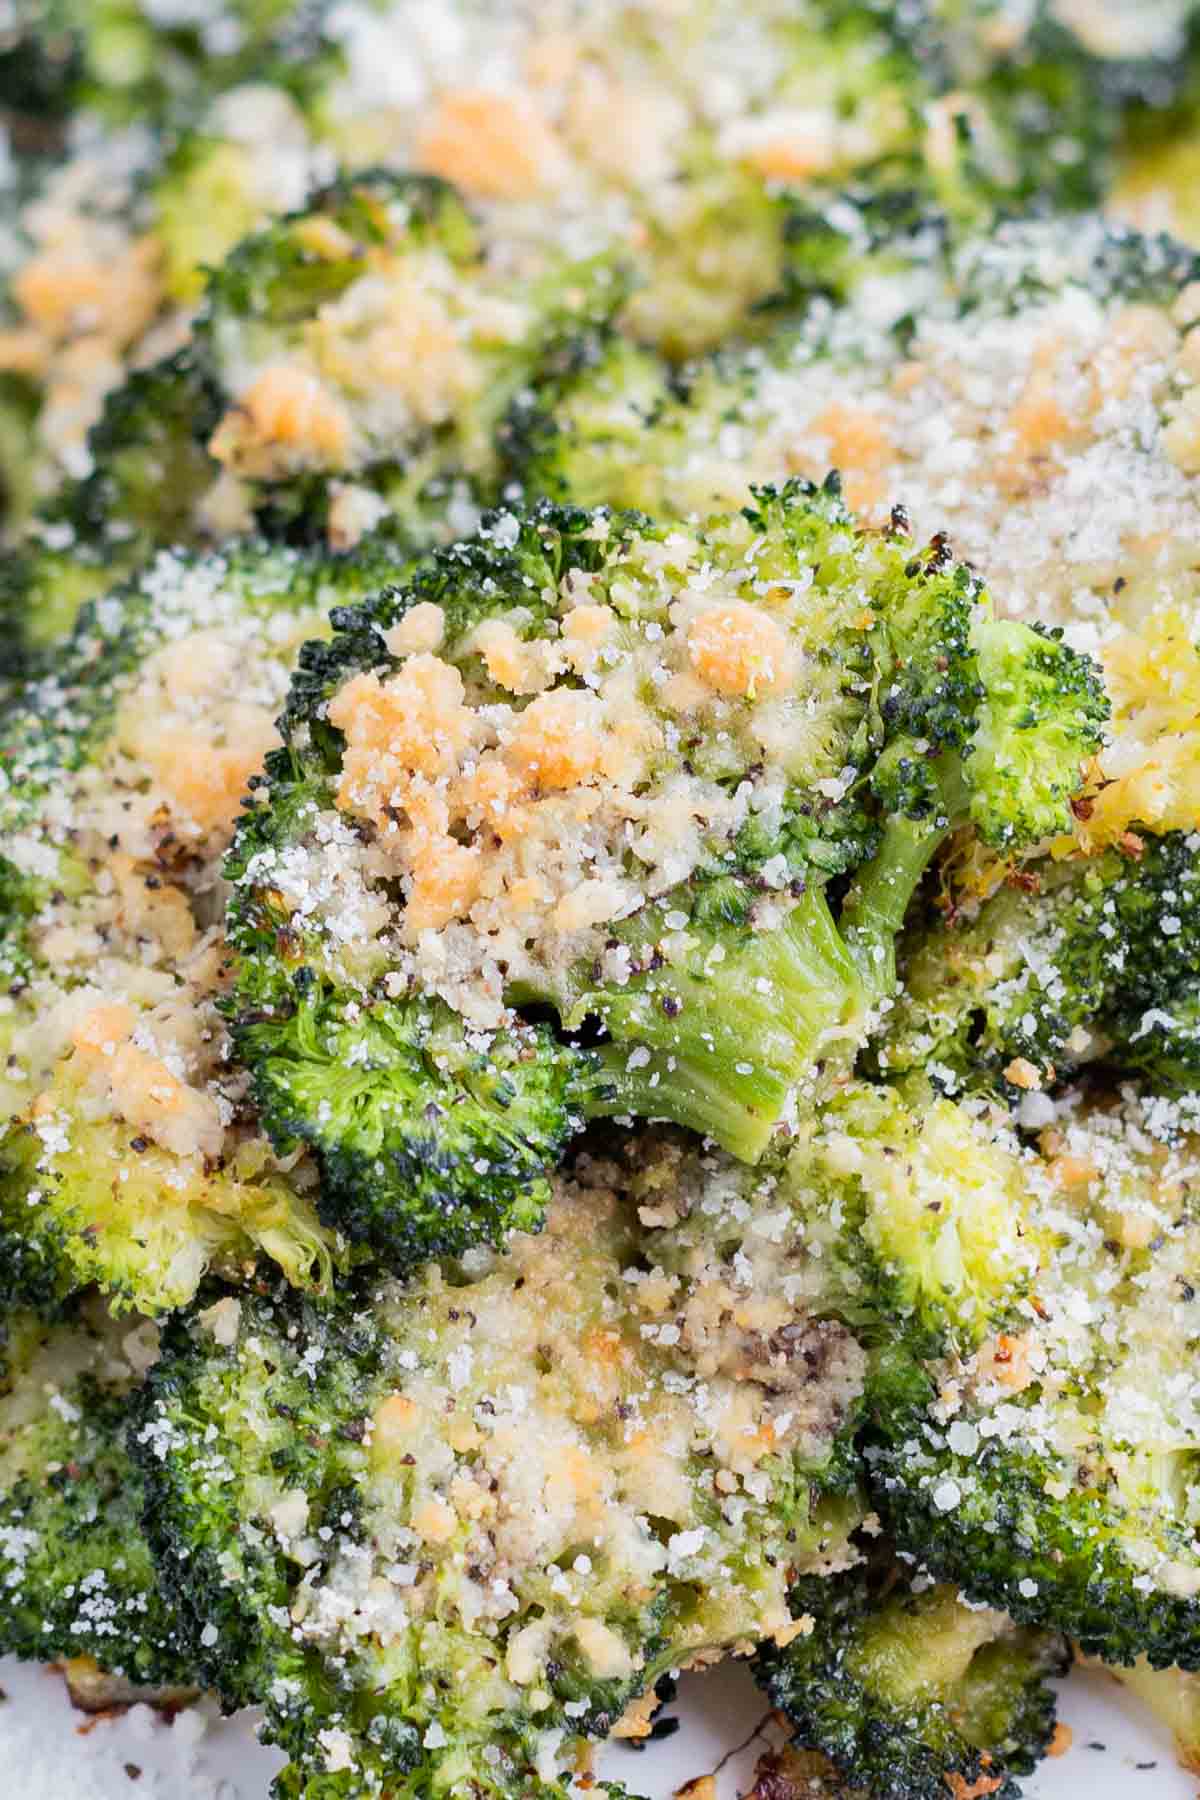 Smashed broccoli is cooked with Parmesan cheese for a crispy side dish.